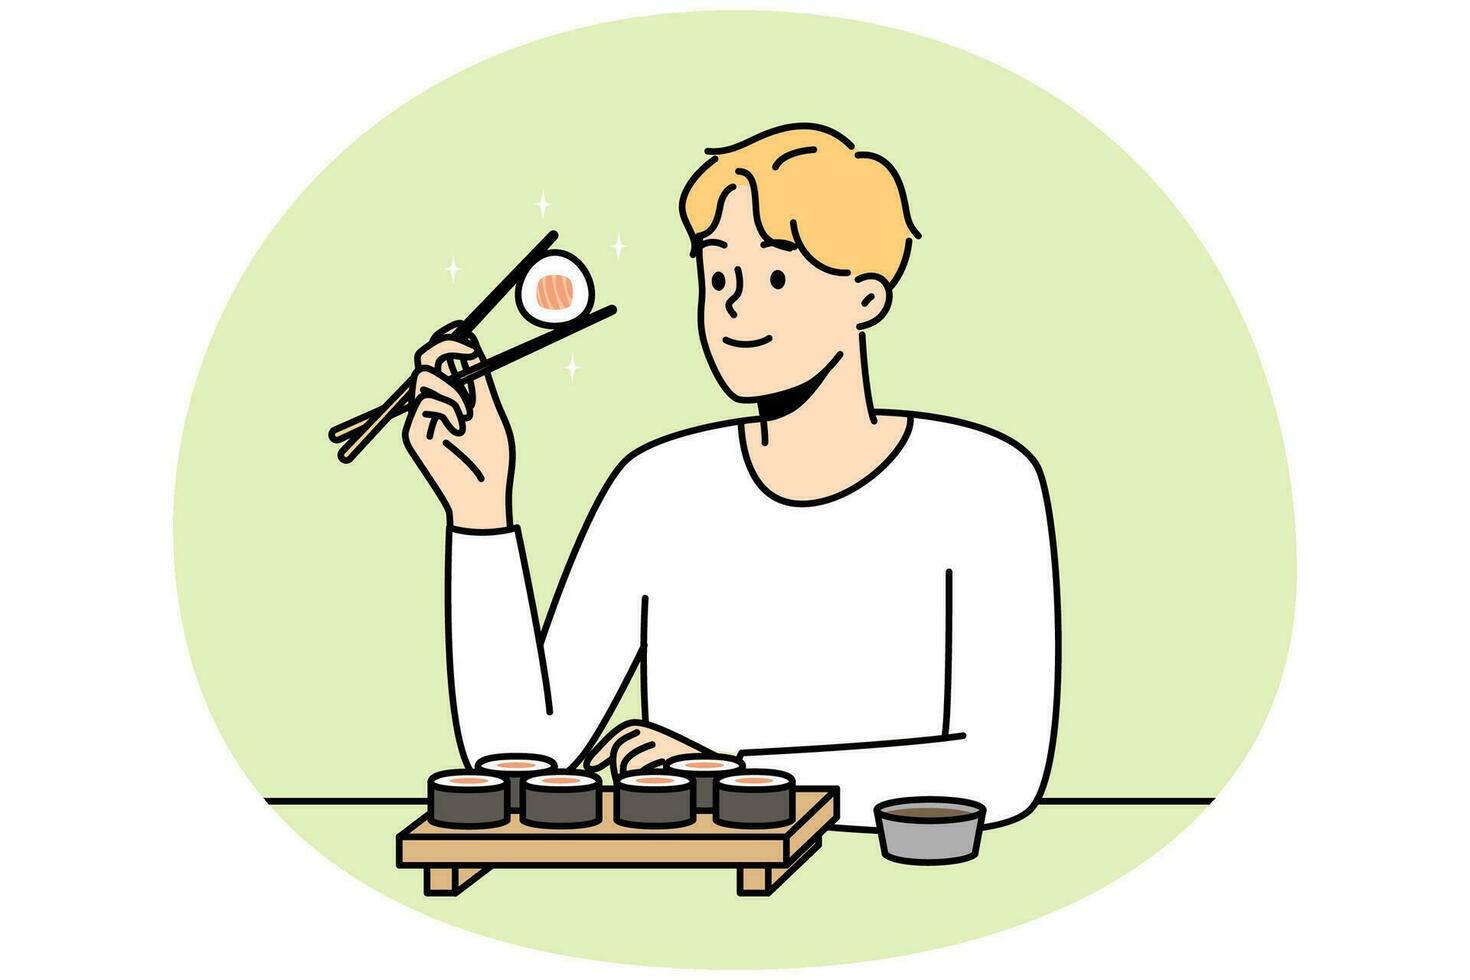 Smiling man sit at table in restaurant eating sushi with chopsticks. Happy guy enjoy traditional Asian food in cafe or bar. Vector illustration.